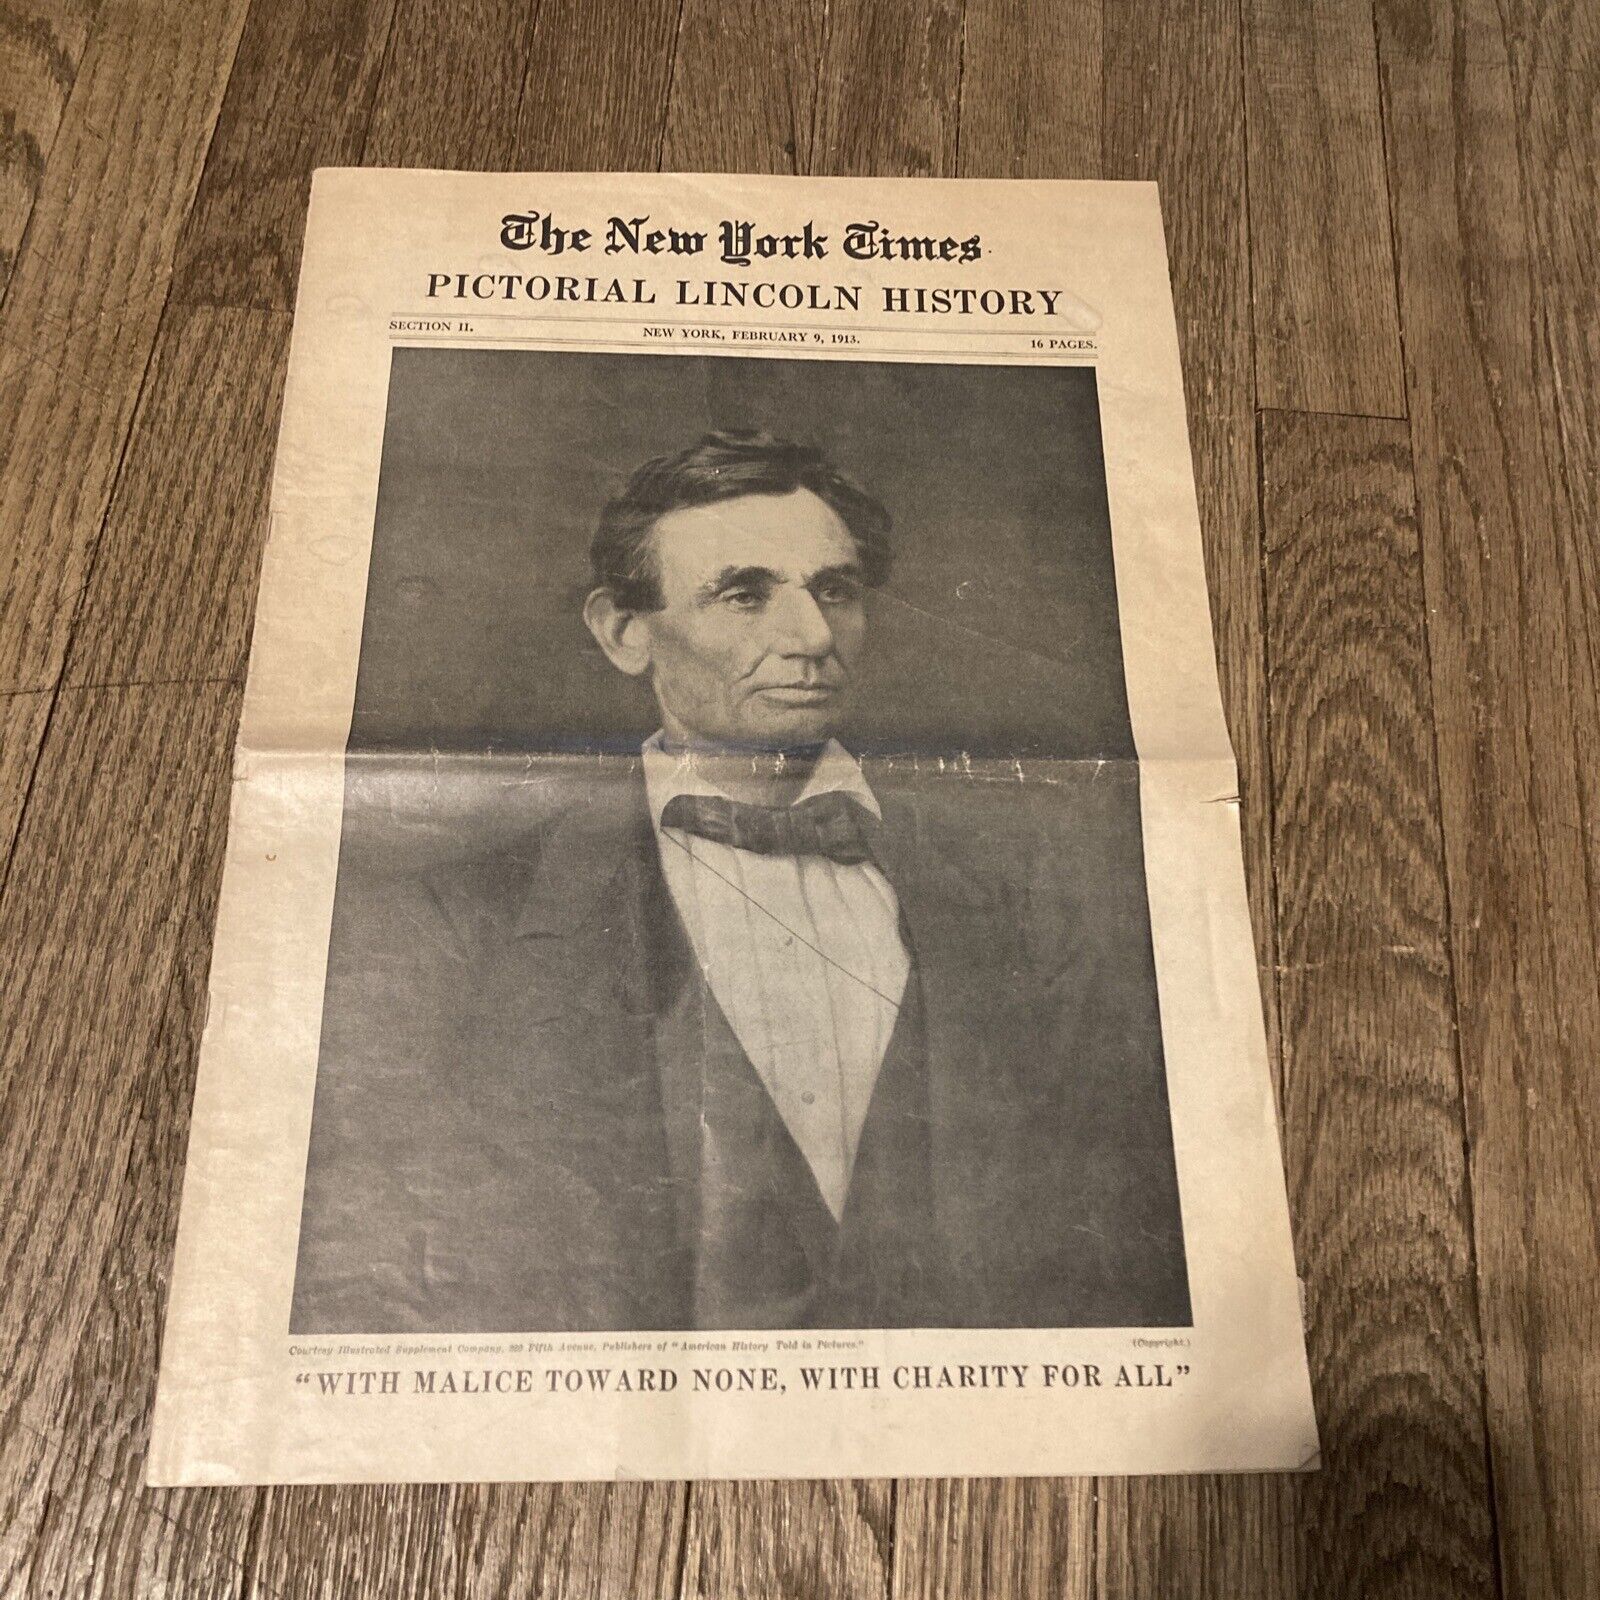 Feb. 9, 1913 New York Times Pictorial Lincoln History *RARE*